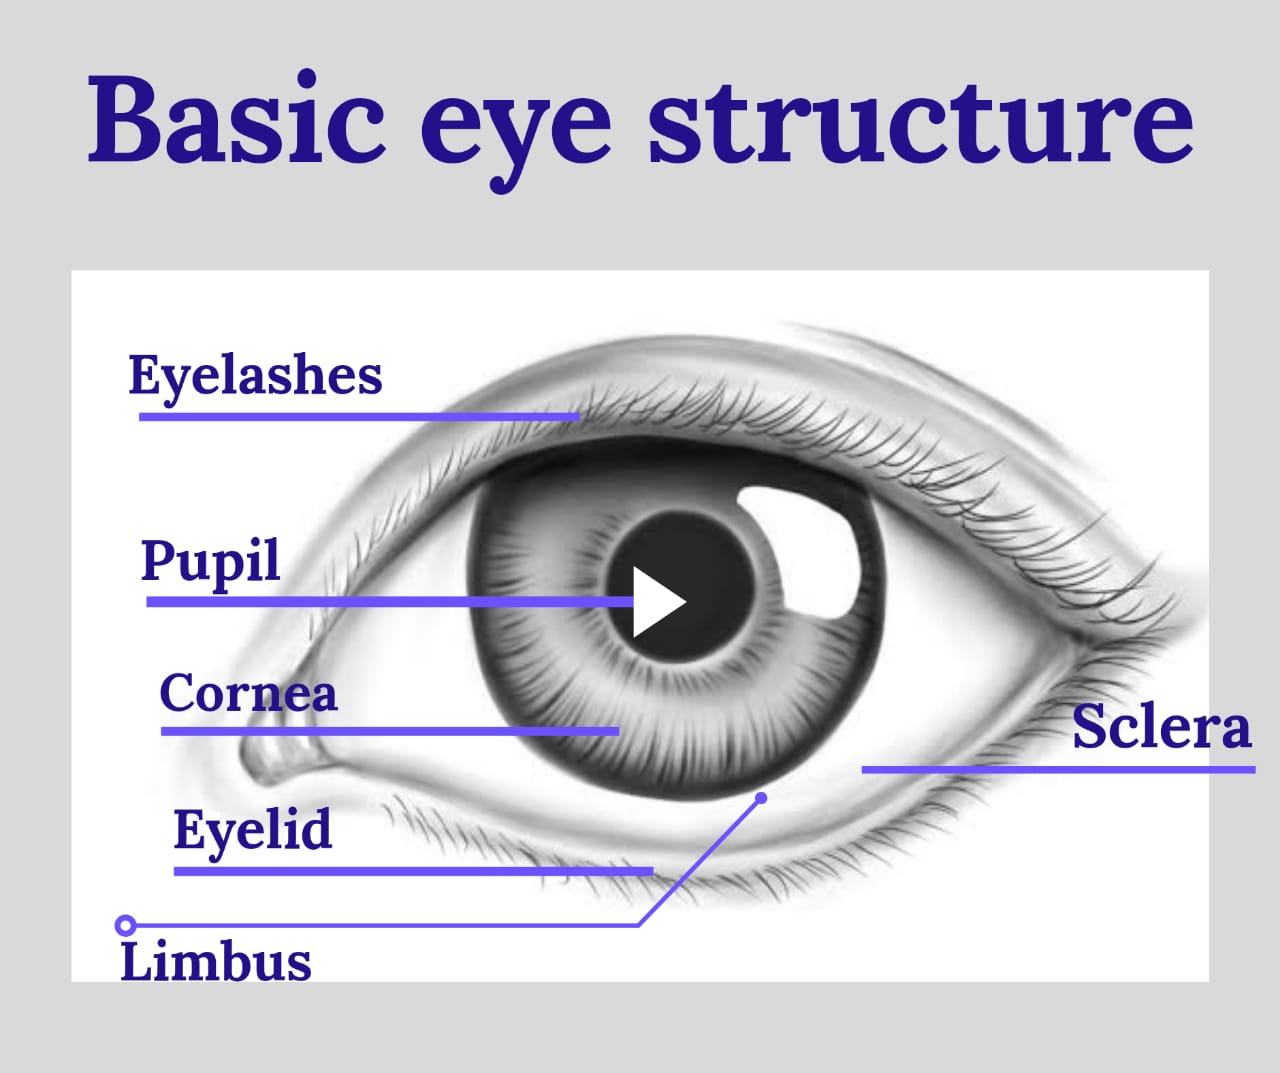 Basic eye structure and part of eye